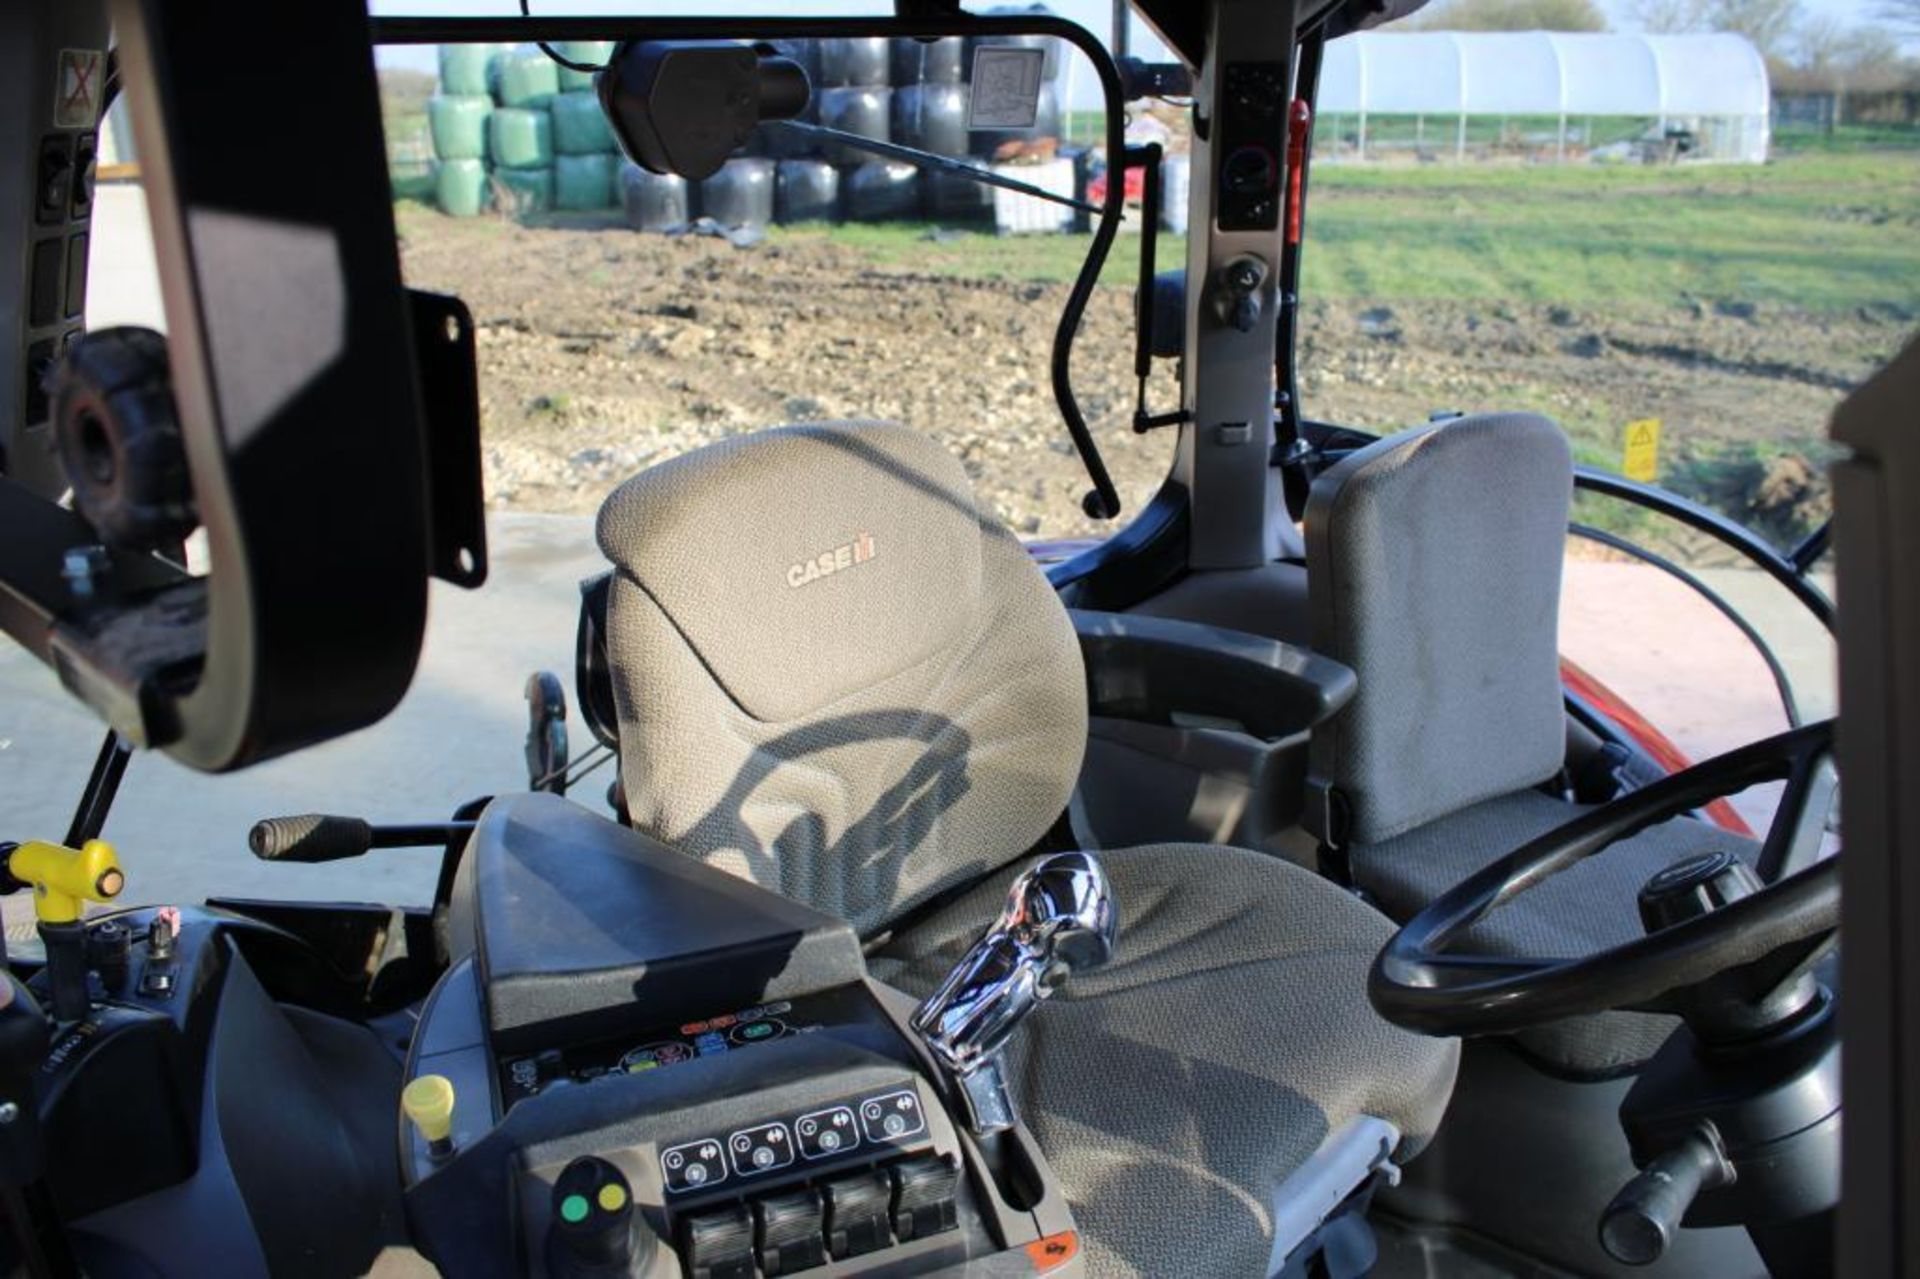 2013 Case Maxxum 140 50kph 4wd Powershift tractor with multicontroller joystick, front linkage, cab - Image 17 of 40